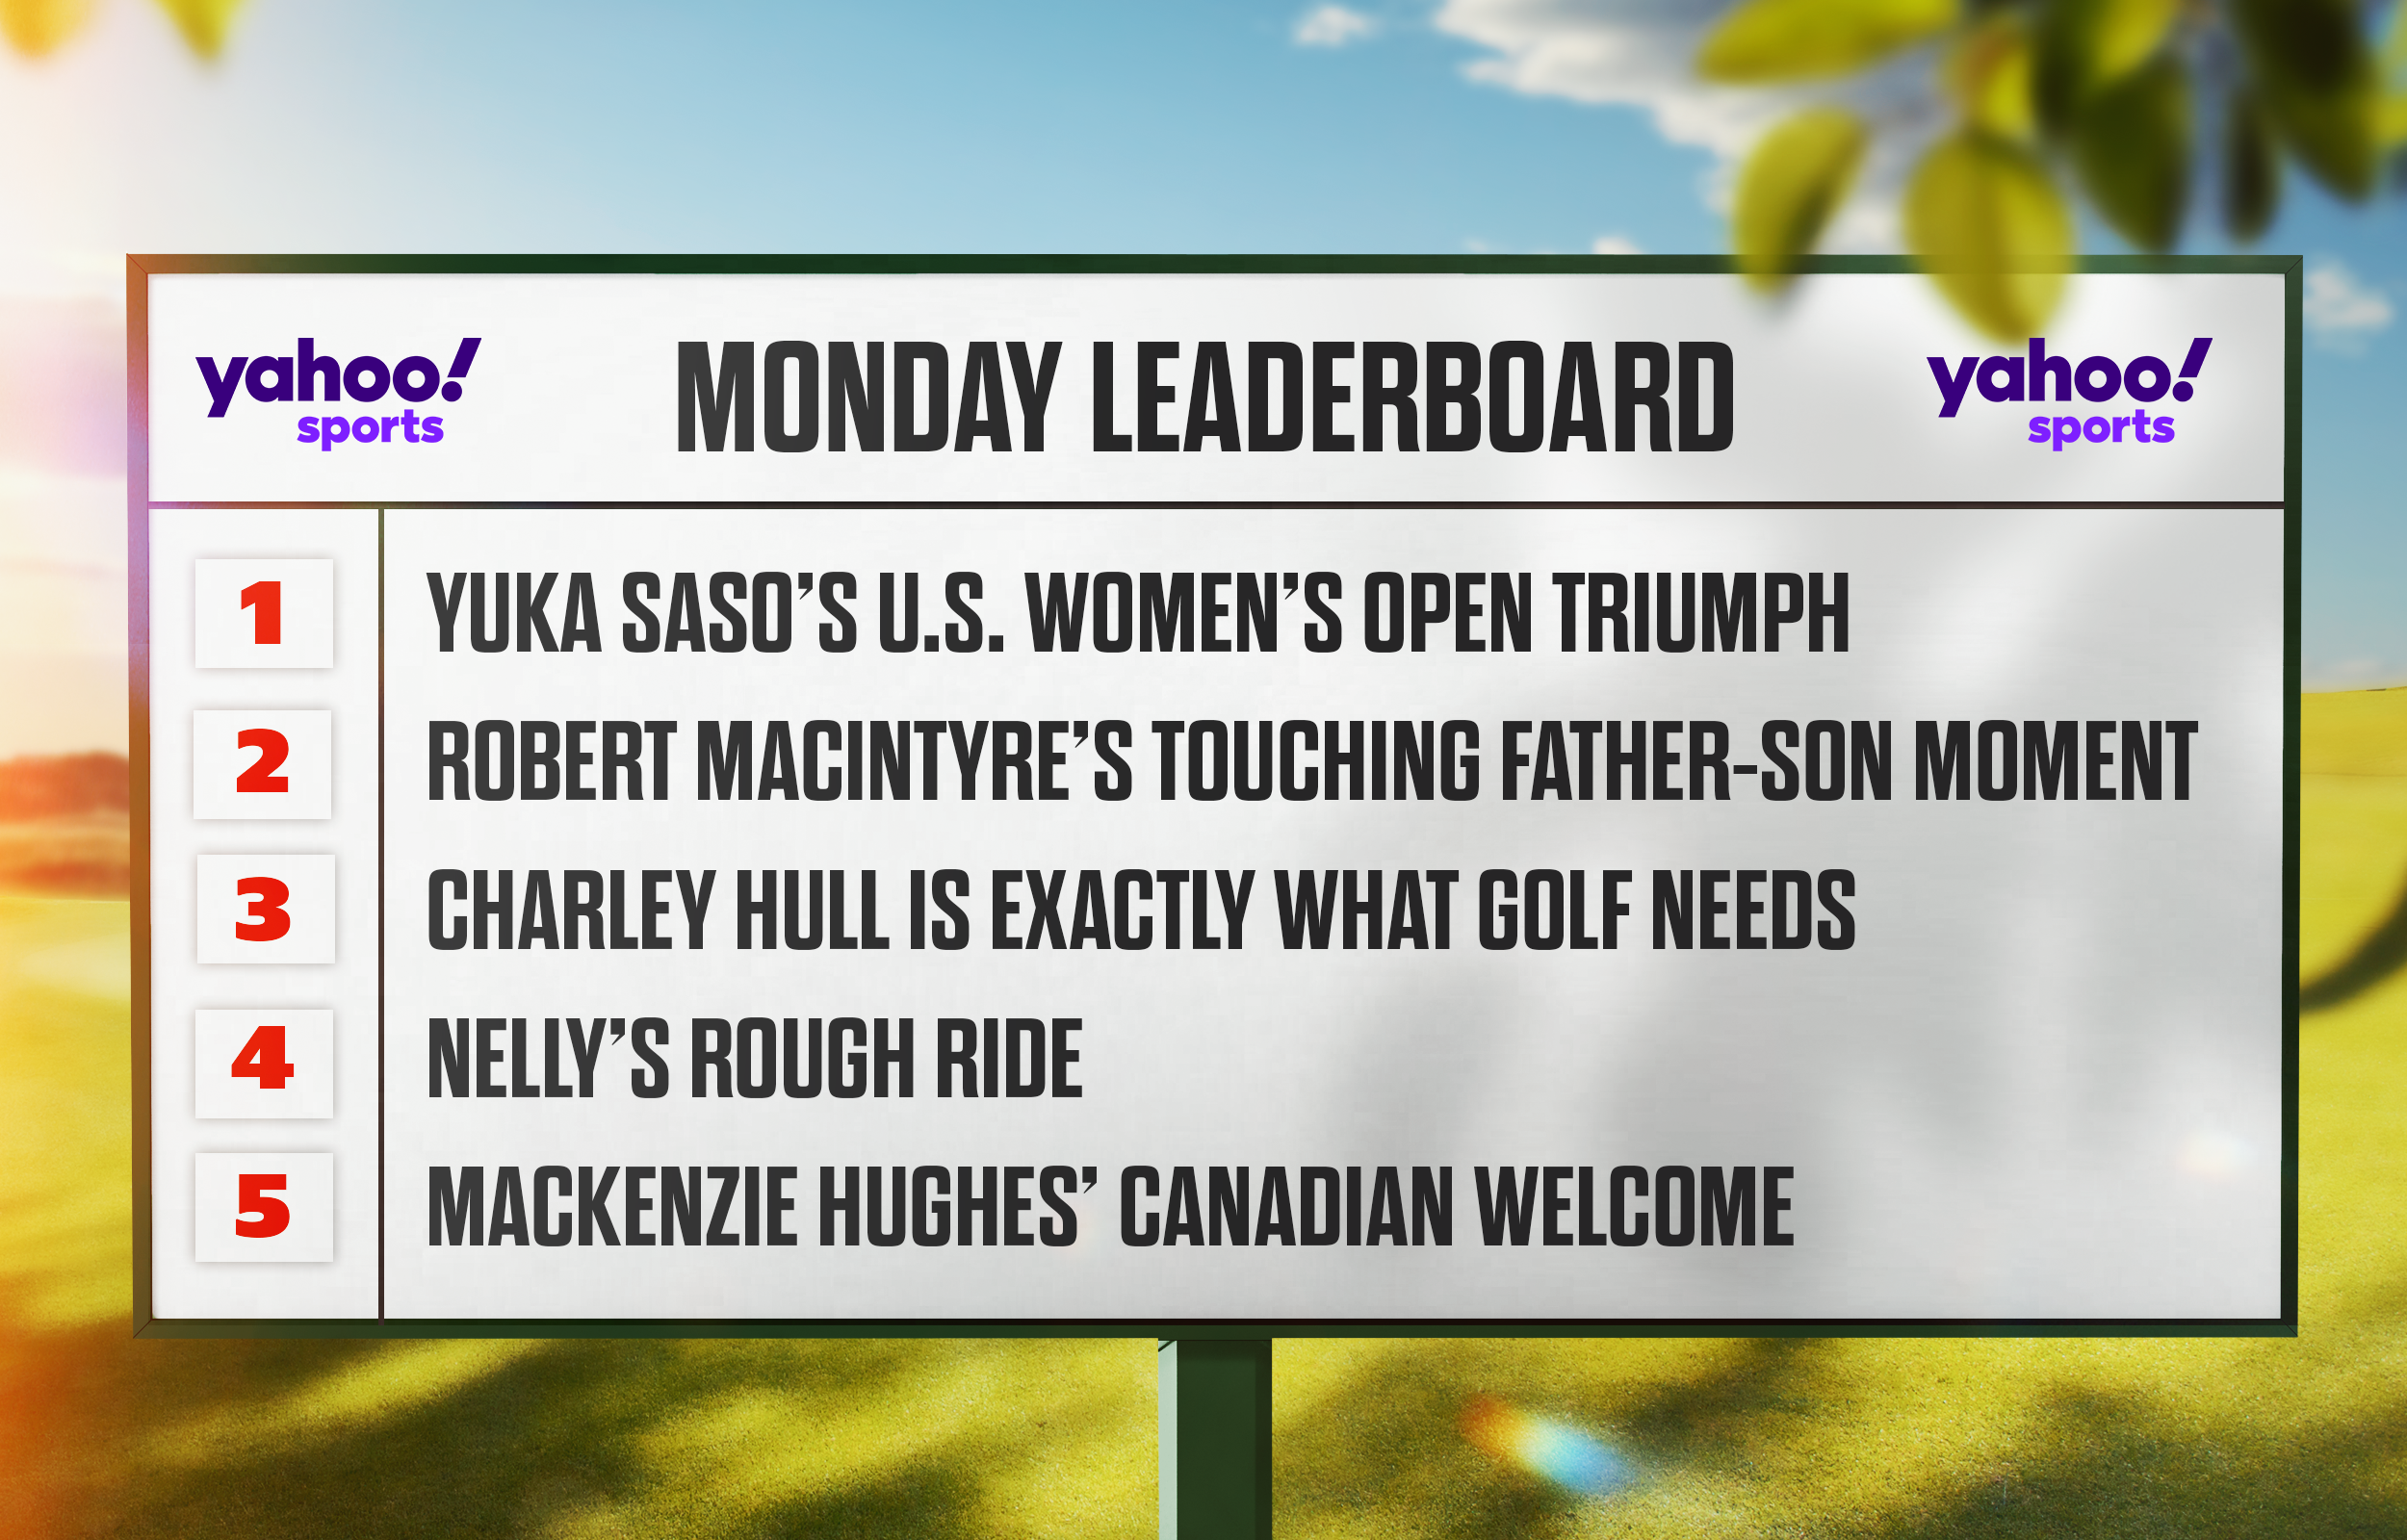 Monday Leaderboard: The golfer the game needs right now